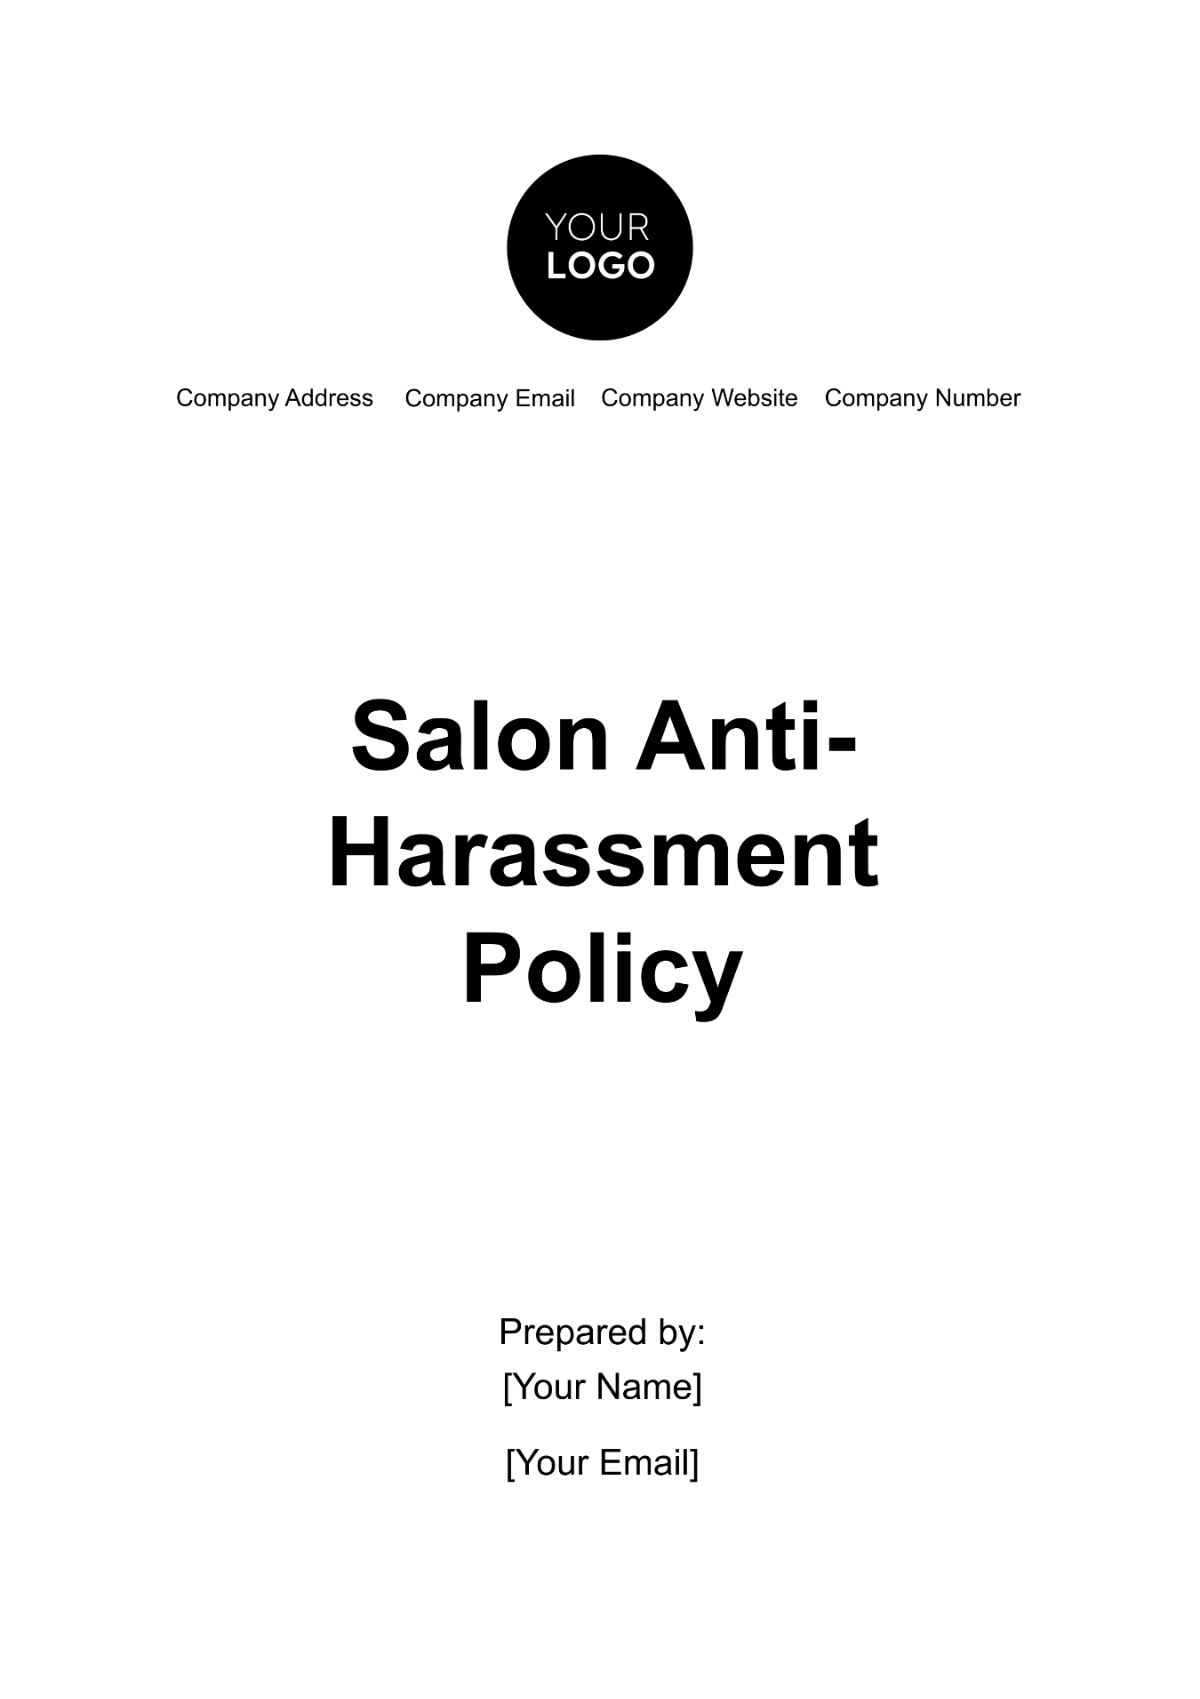 Free Salon Anti-Harassment Policy Template